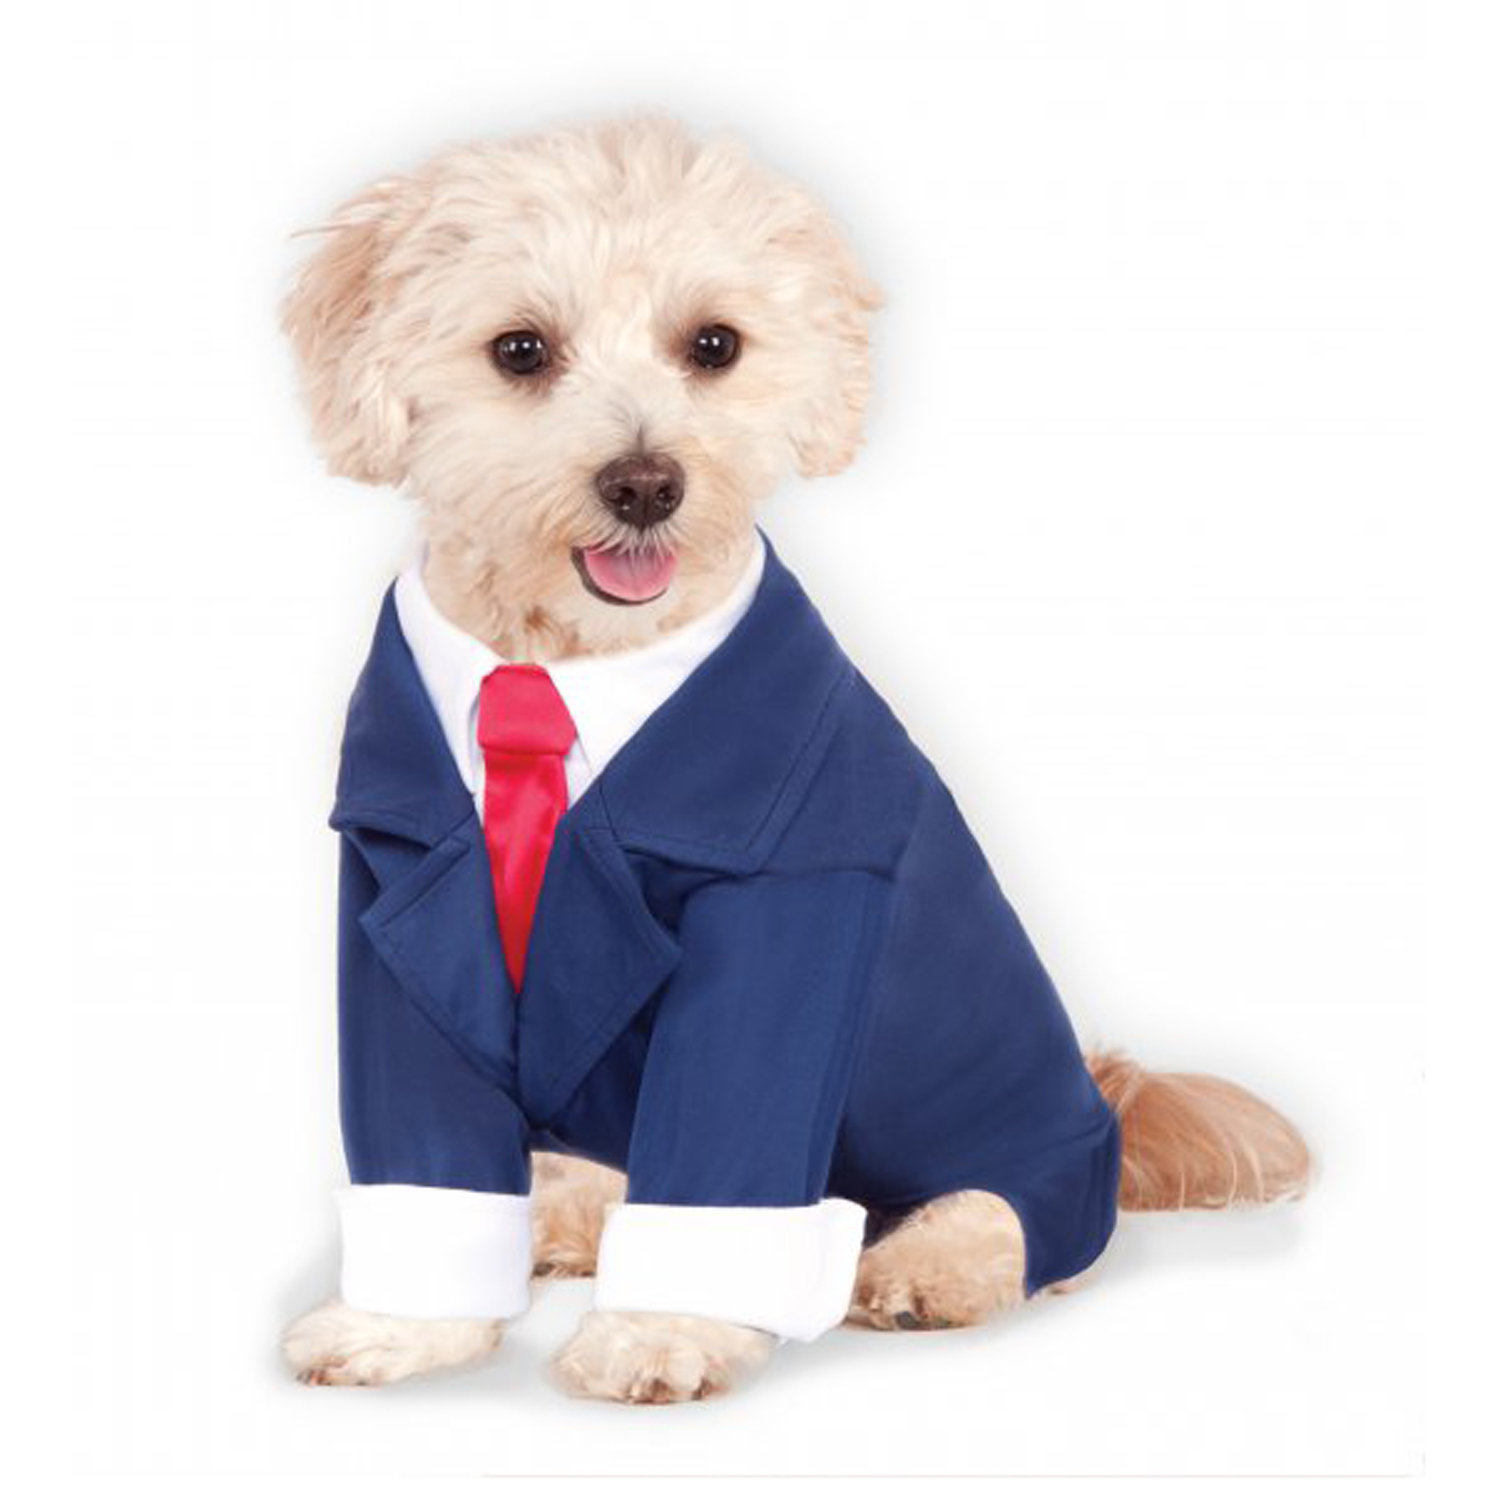 Business Suit Dog Costume - Navy